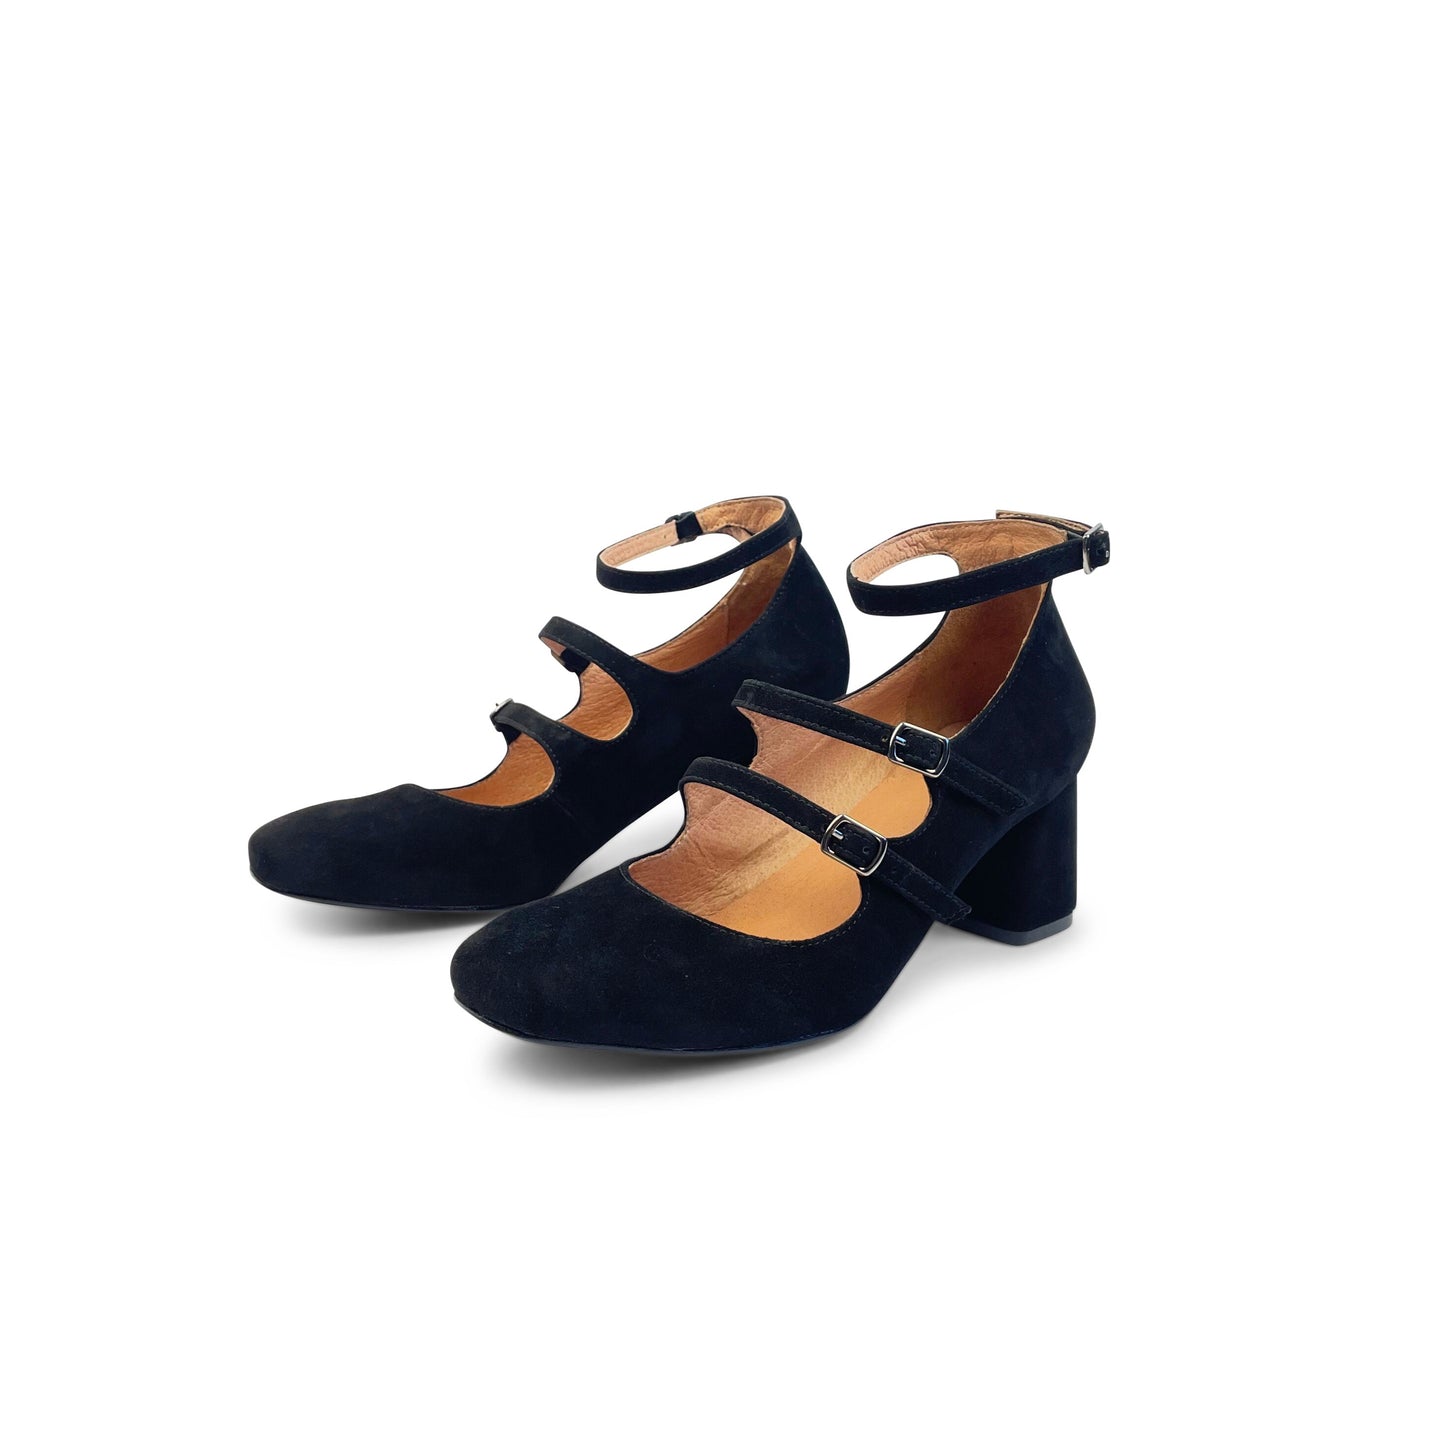 Black Suede Mary Jane Block Heeled Pumps with Three Straps